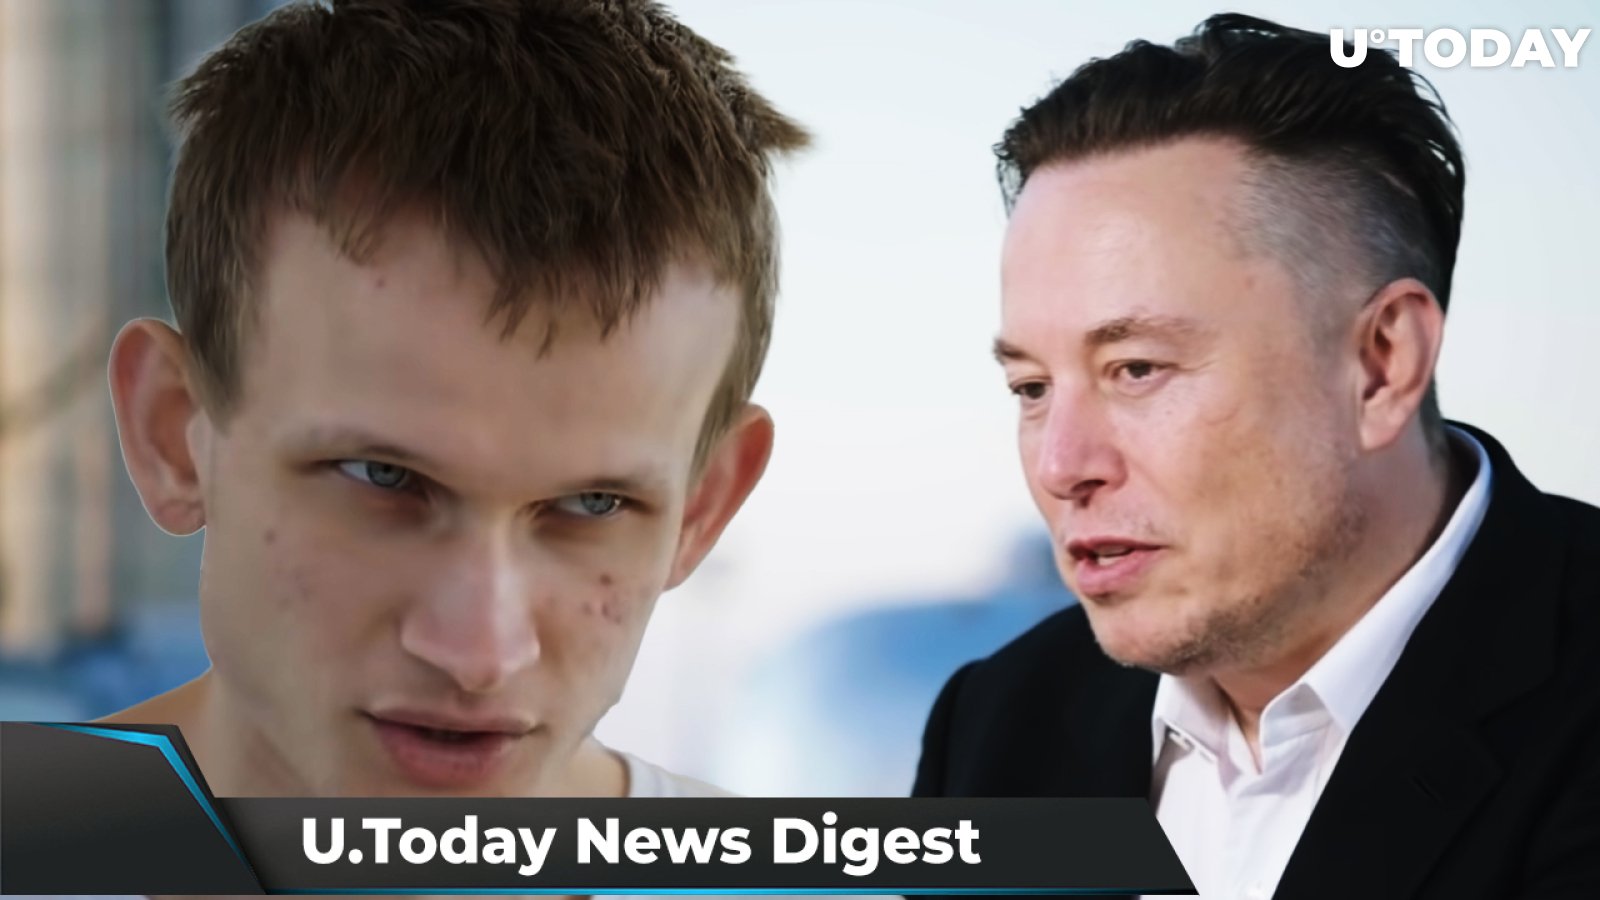 Elon Musk Wants Sen. Warren to Leave, SHIB Burn Rate to Double in 60 Days, Vitalik Buterin Meets Argentina’s Former President: Crypto News Digest by U.Today